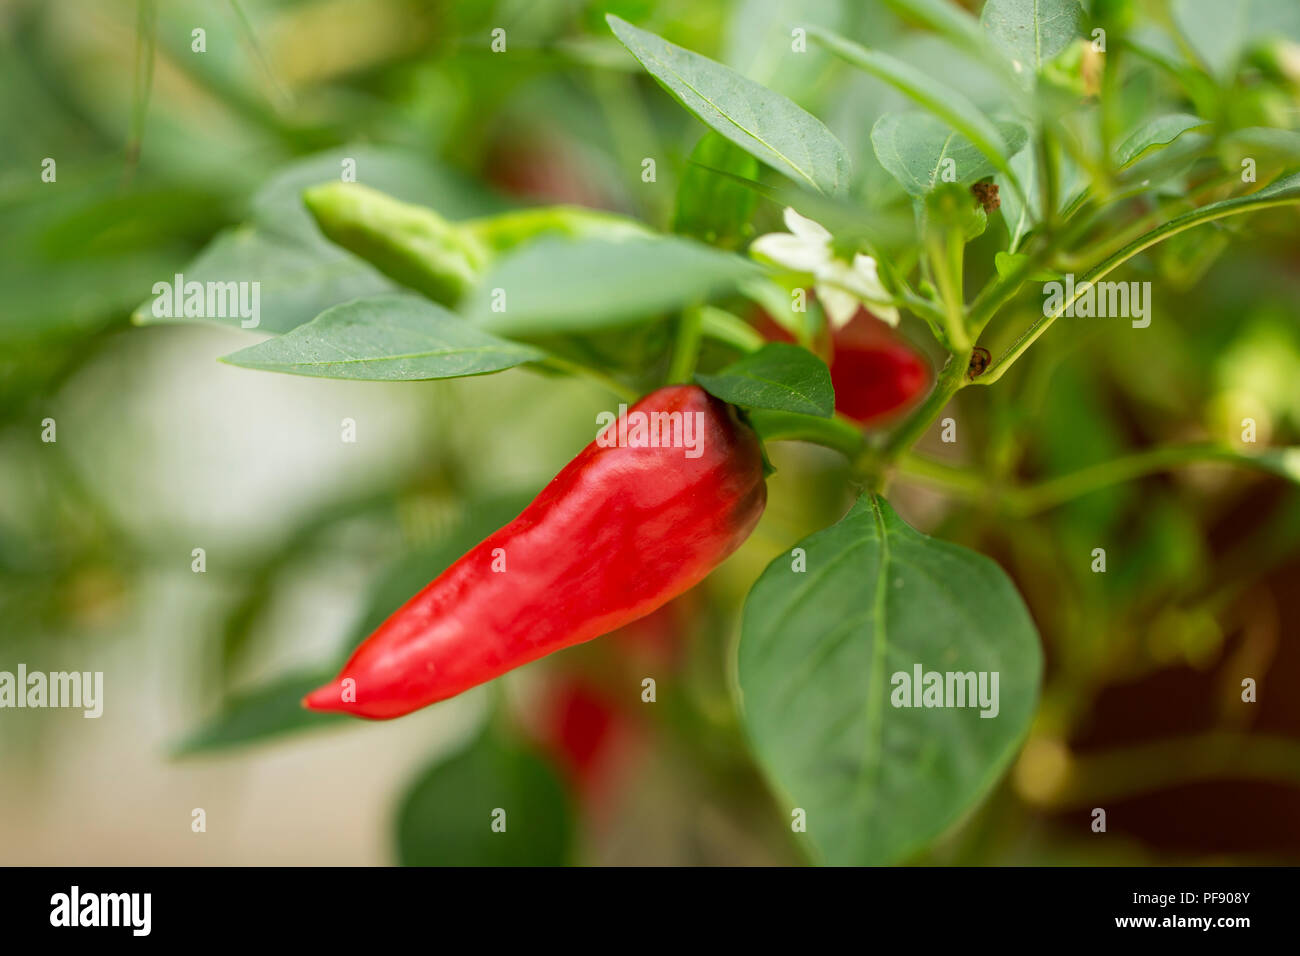 Capsicum annuum, a sweet pepper in the variety Golden Greek Pepperoncini, growing in a garden. Stock Photo